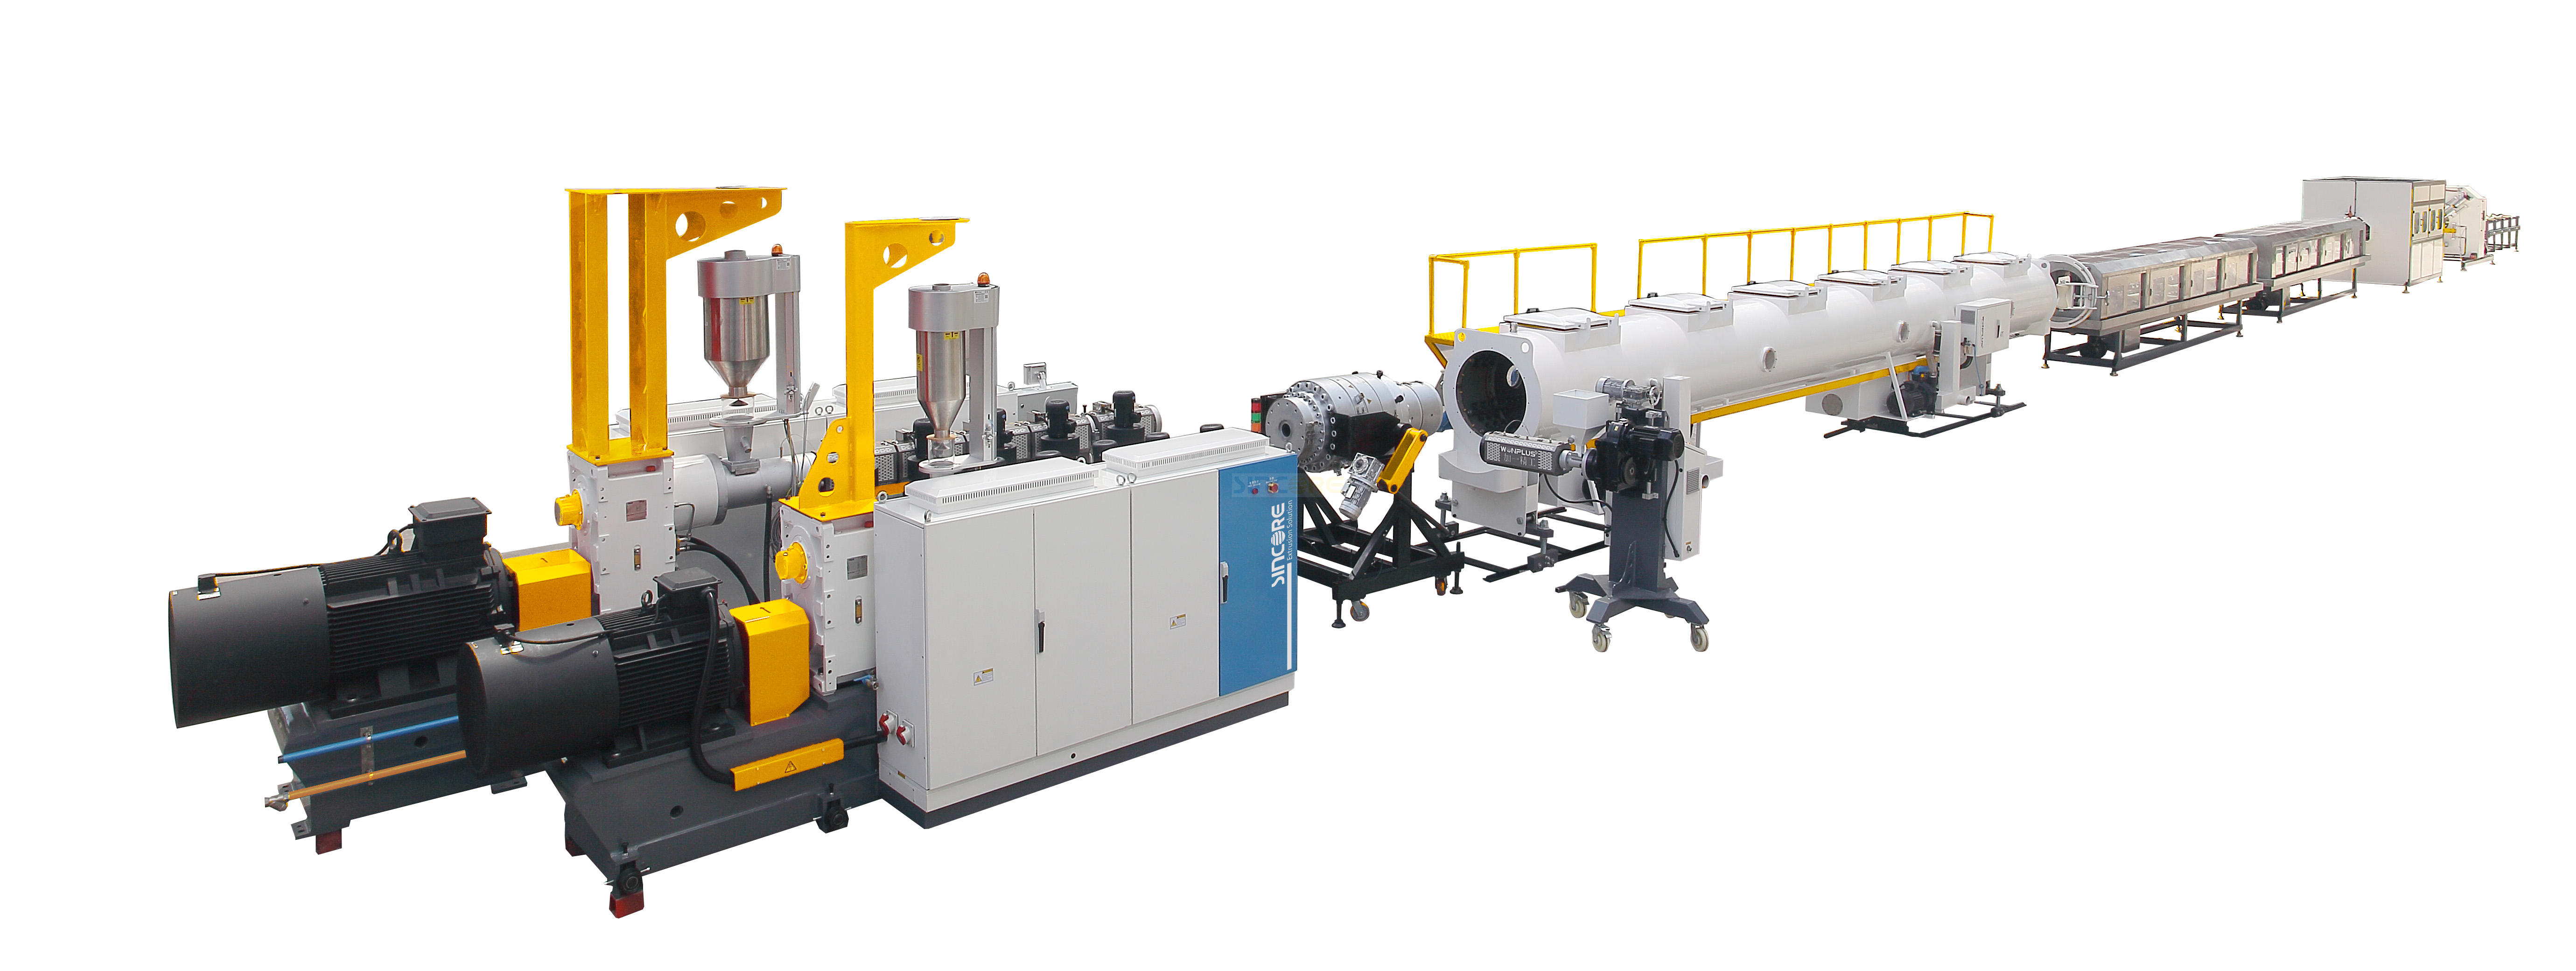 HDPE/PPR Multilayer Pipe Extrusion Line